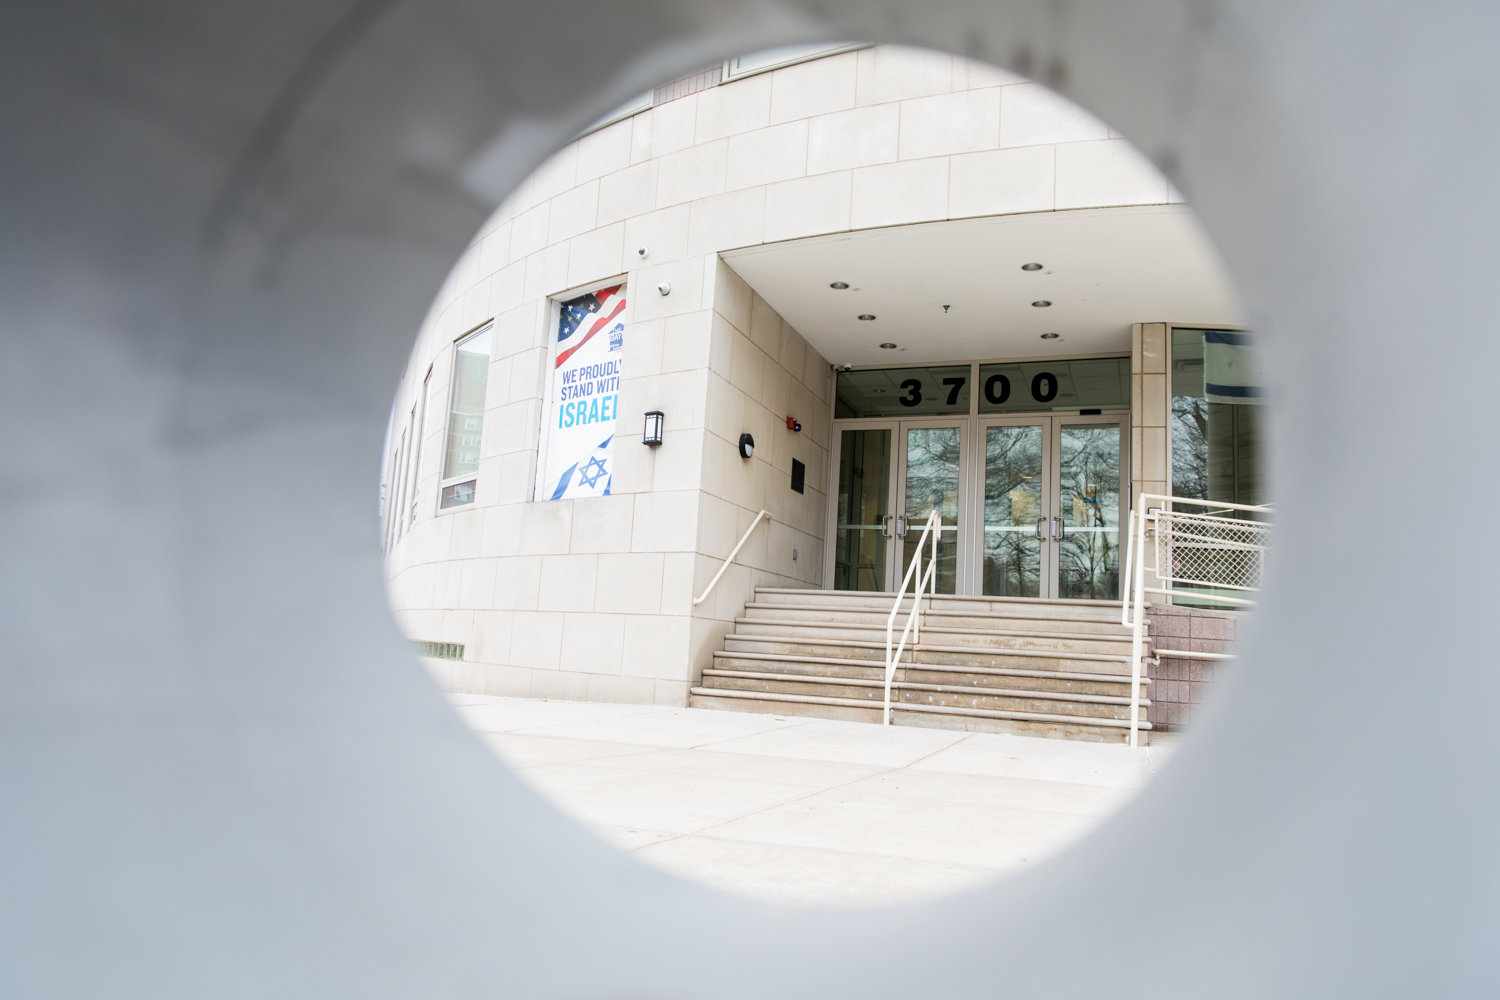 The entrance to the Hebrew Institute of Riverdale is seen through a barrier. The synagogue wants to install 25 steel protective bollards around its entrance.